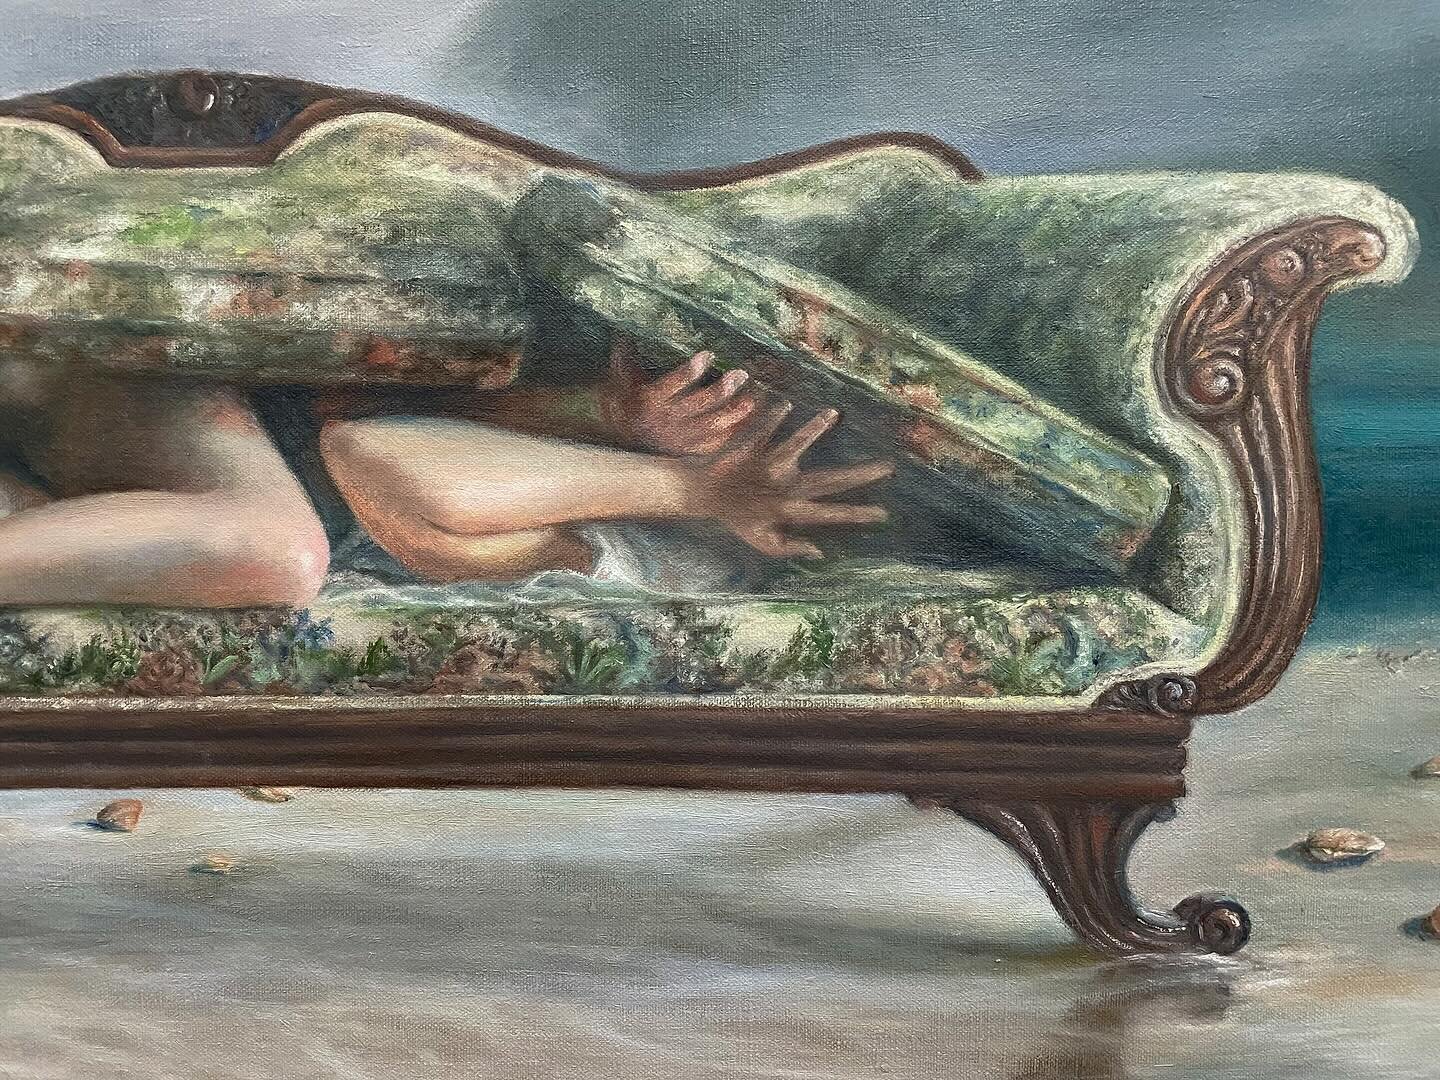 ✧ &ldquo;Woman in Repose&rdquo; 22x30 oil on linen 
__________
Started painting this in august last year and finally made some touch ups in order for it to feel fully how I envisioned 🩶 this is my favorite painting I have done in years and I&rsquo;m